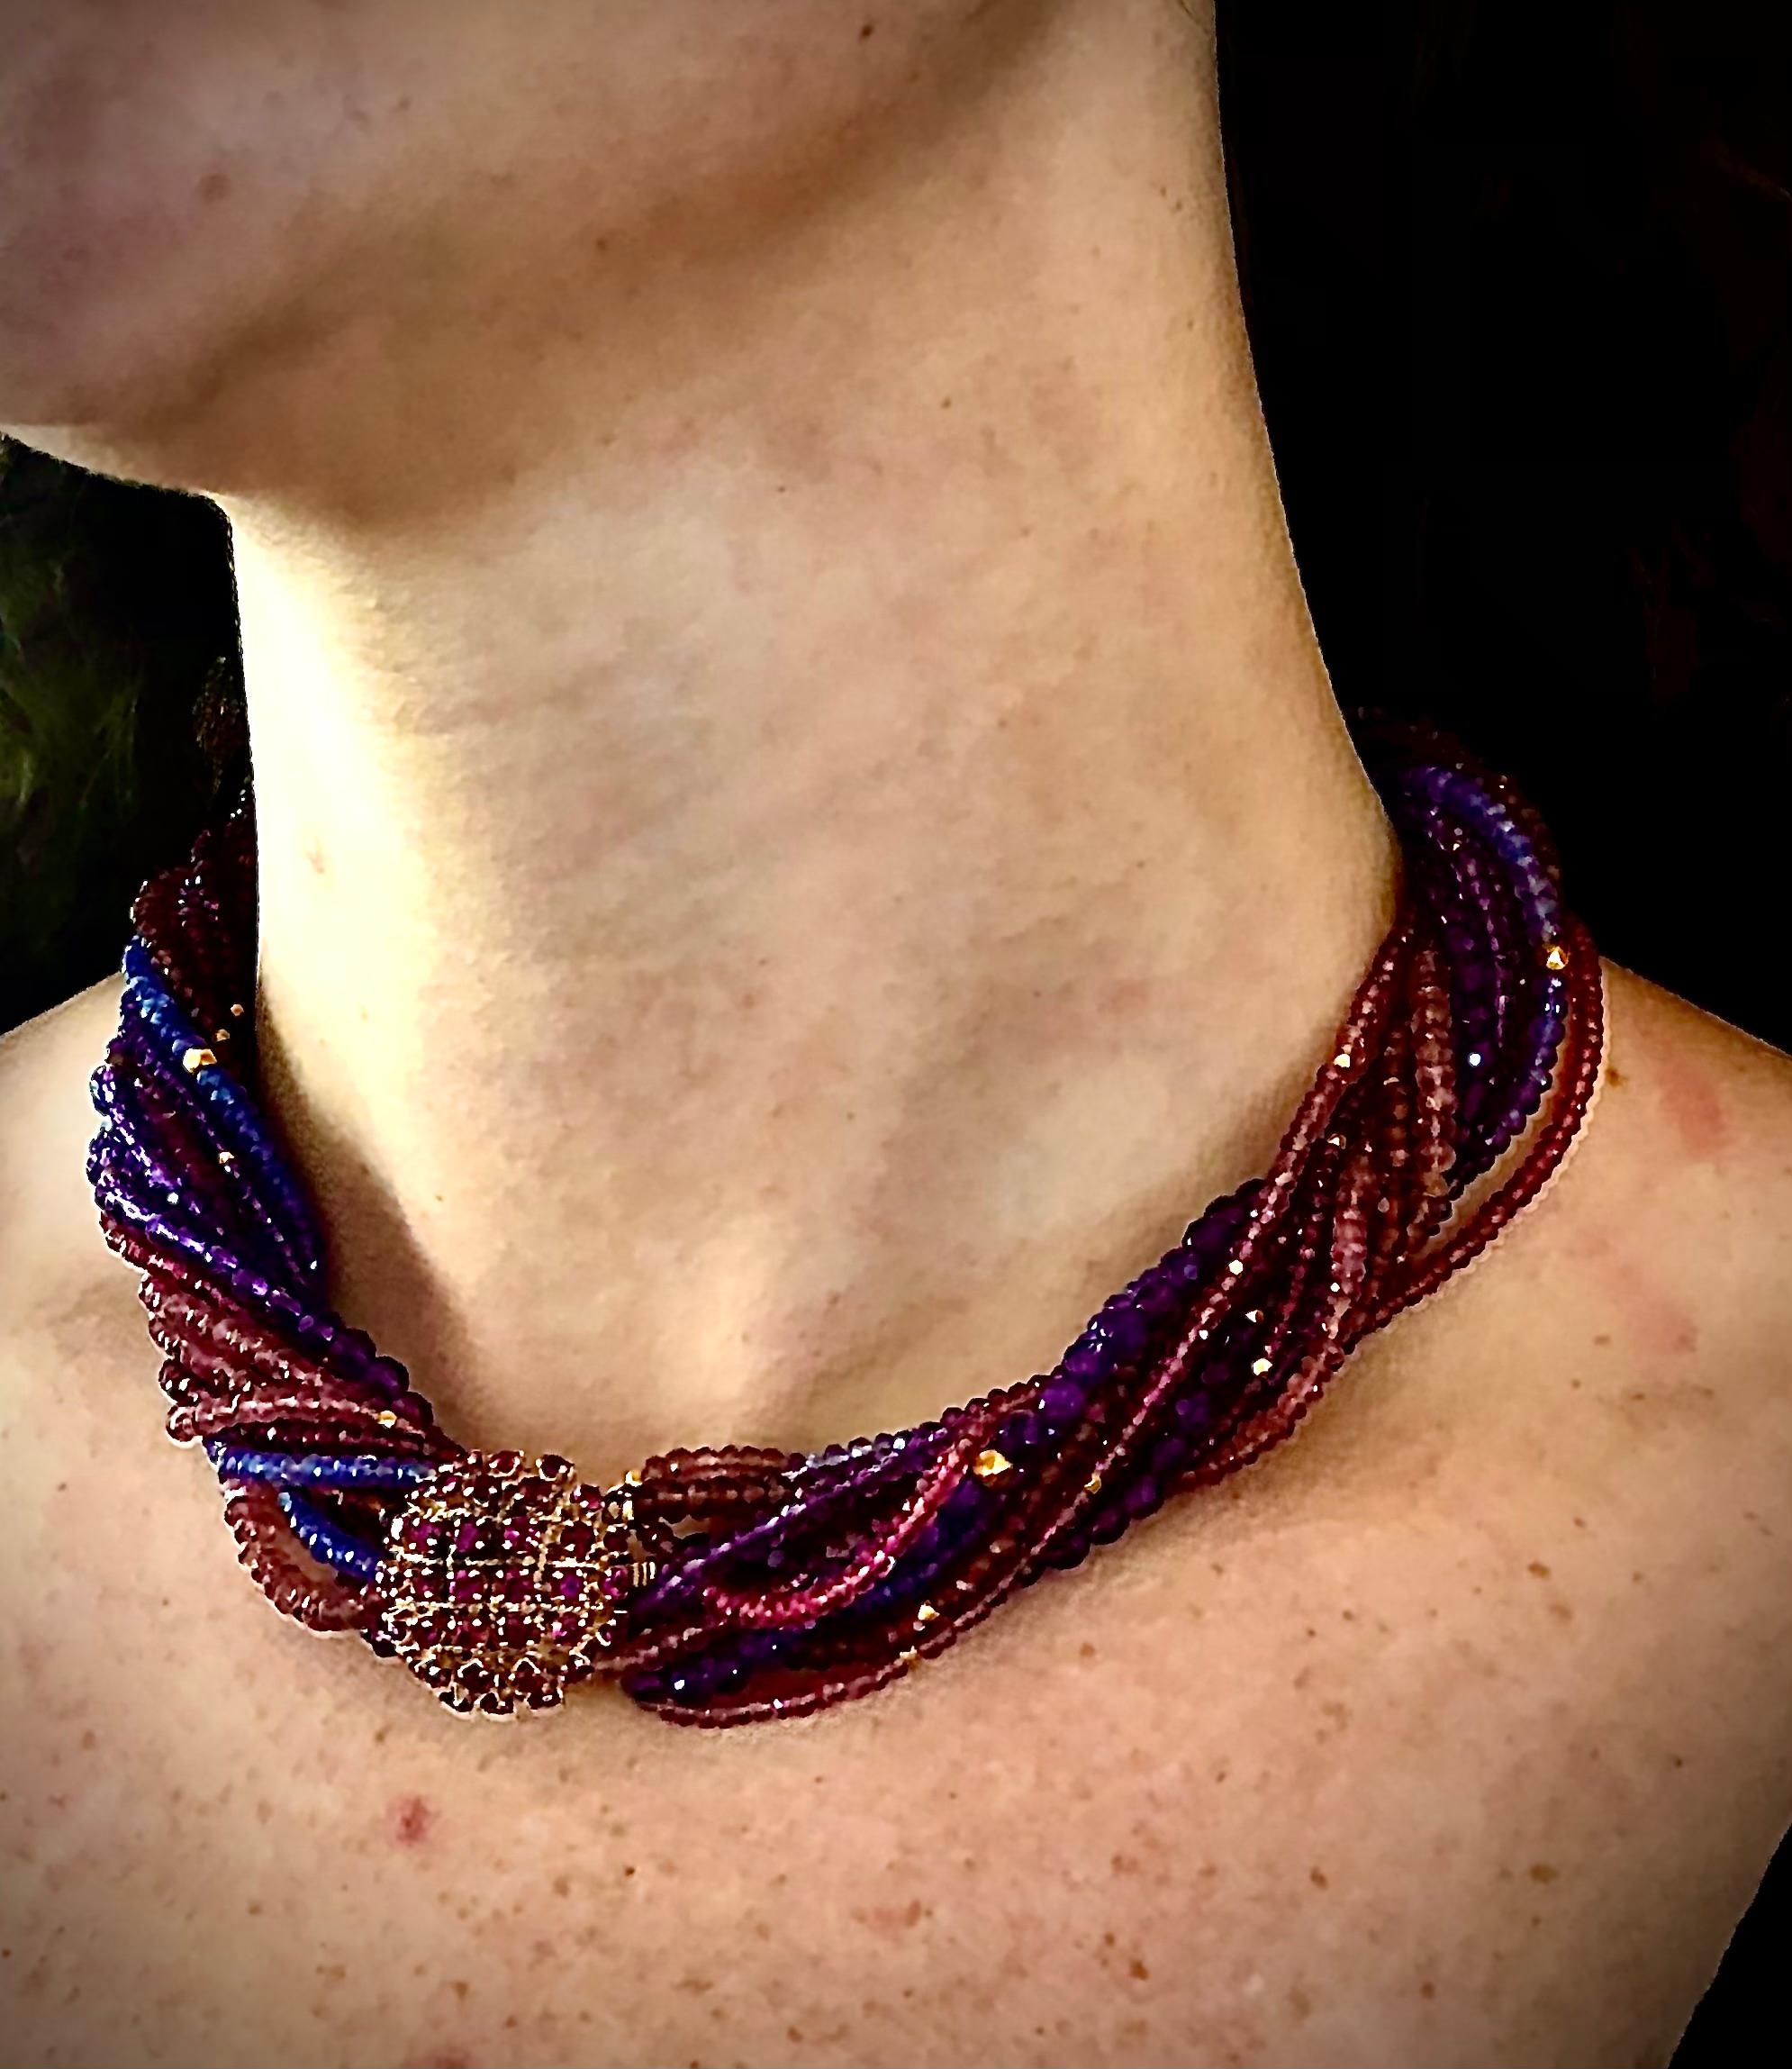 Multiple strand (8 strands plus) torsade necklace.
Amythest, tourmaline, iolite with 18kt gold geometric accent beads. 18kt gold and ruby set box clasp. 16.5” long .